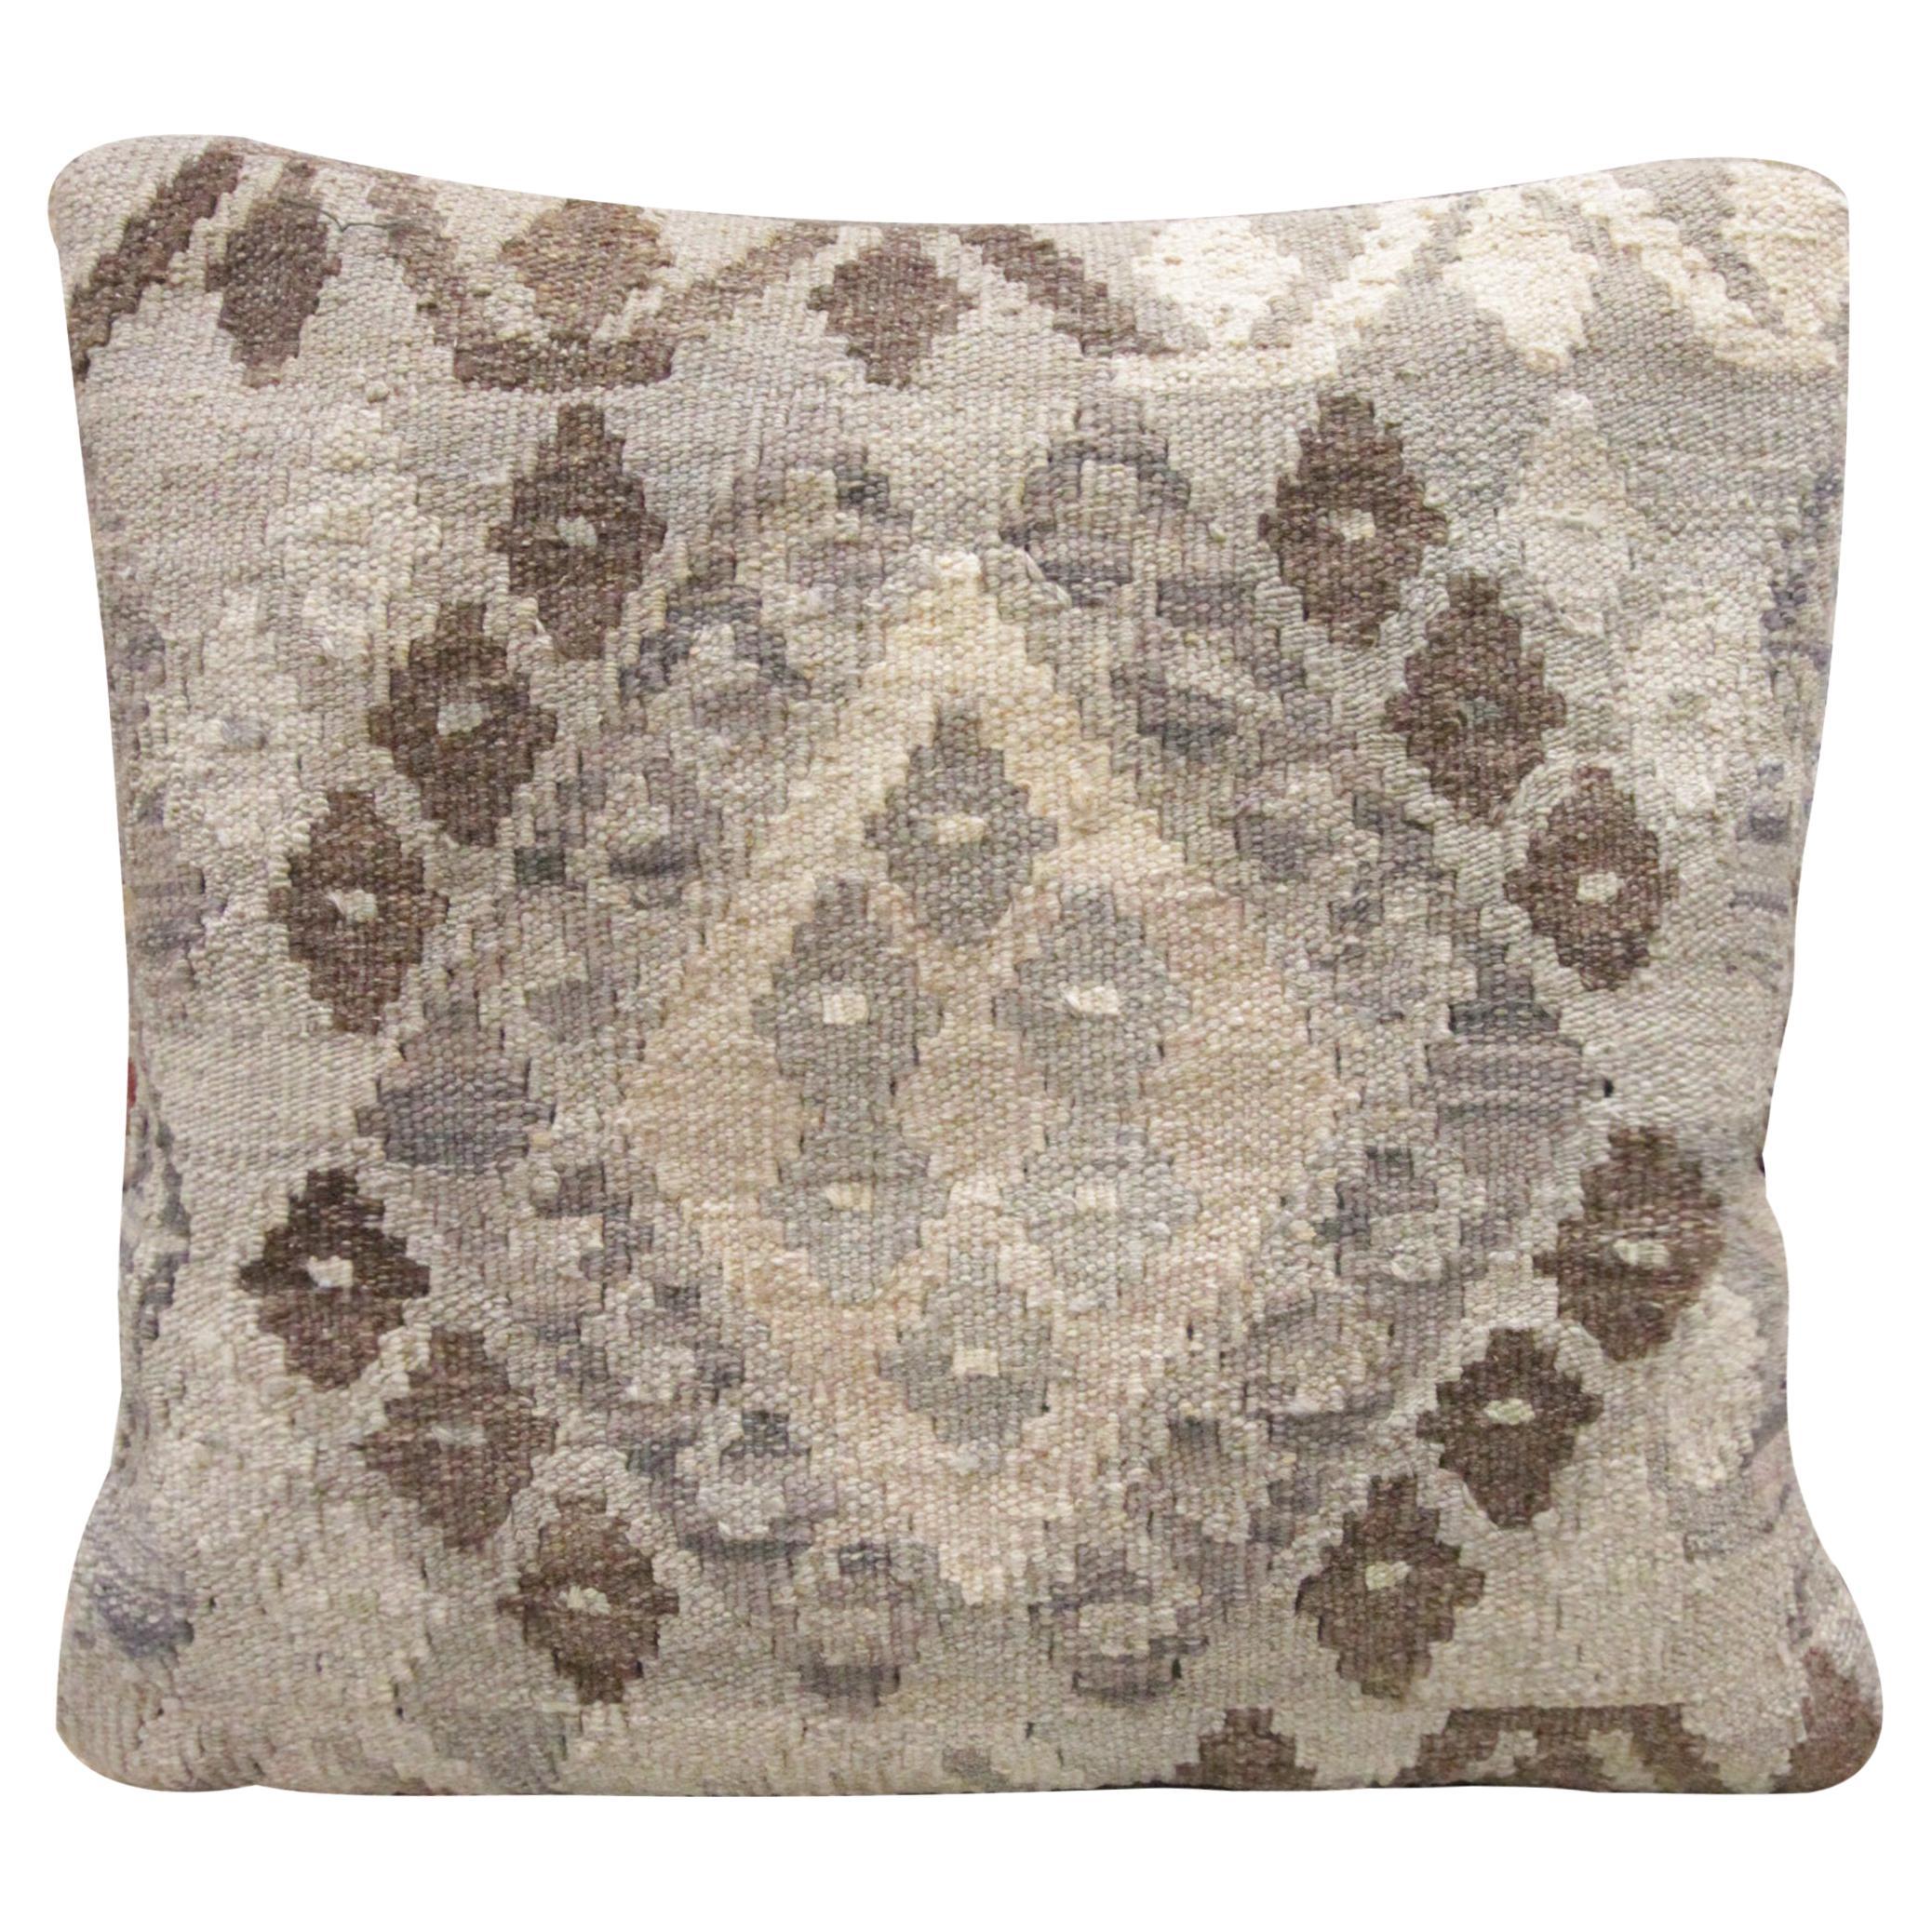 3 set of Wooden Block Printed Hand Woven Kilim Cushion Cover Throw Pillows 4032 